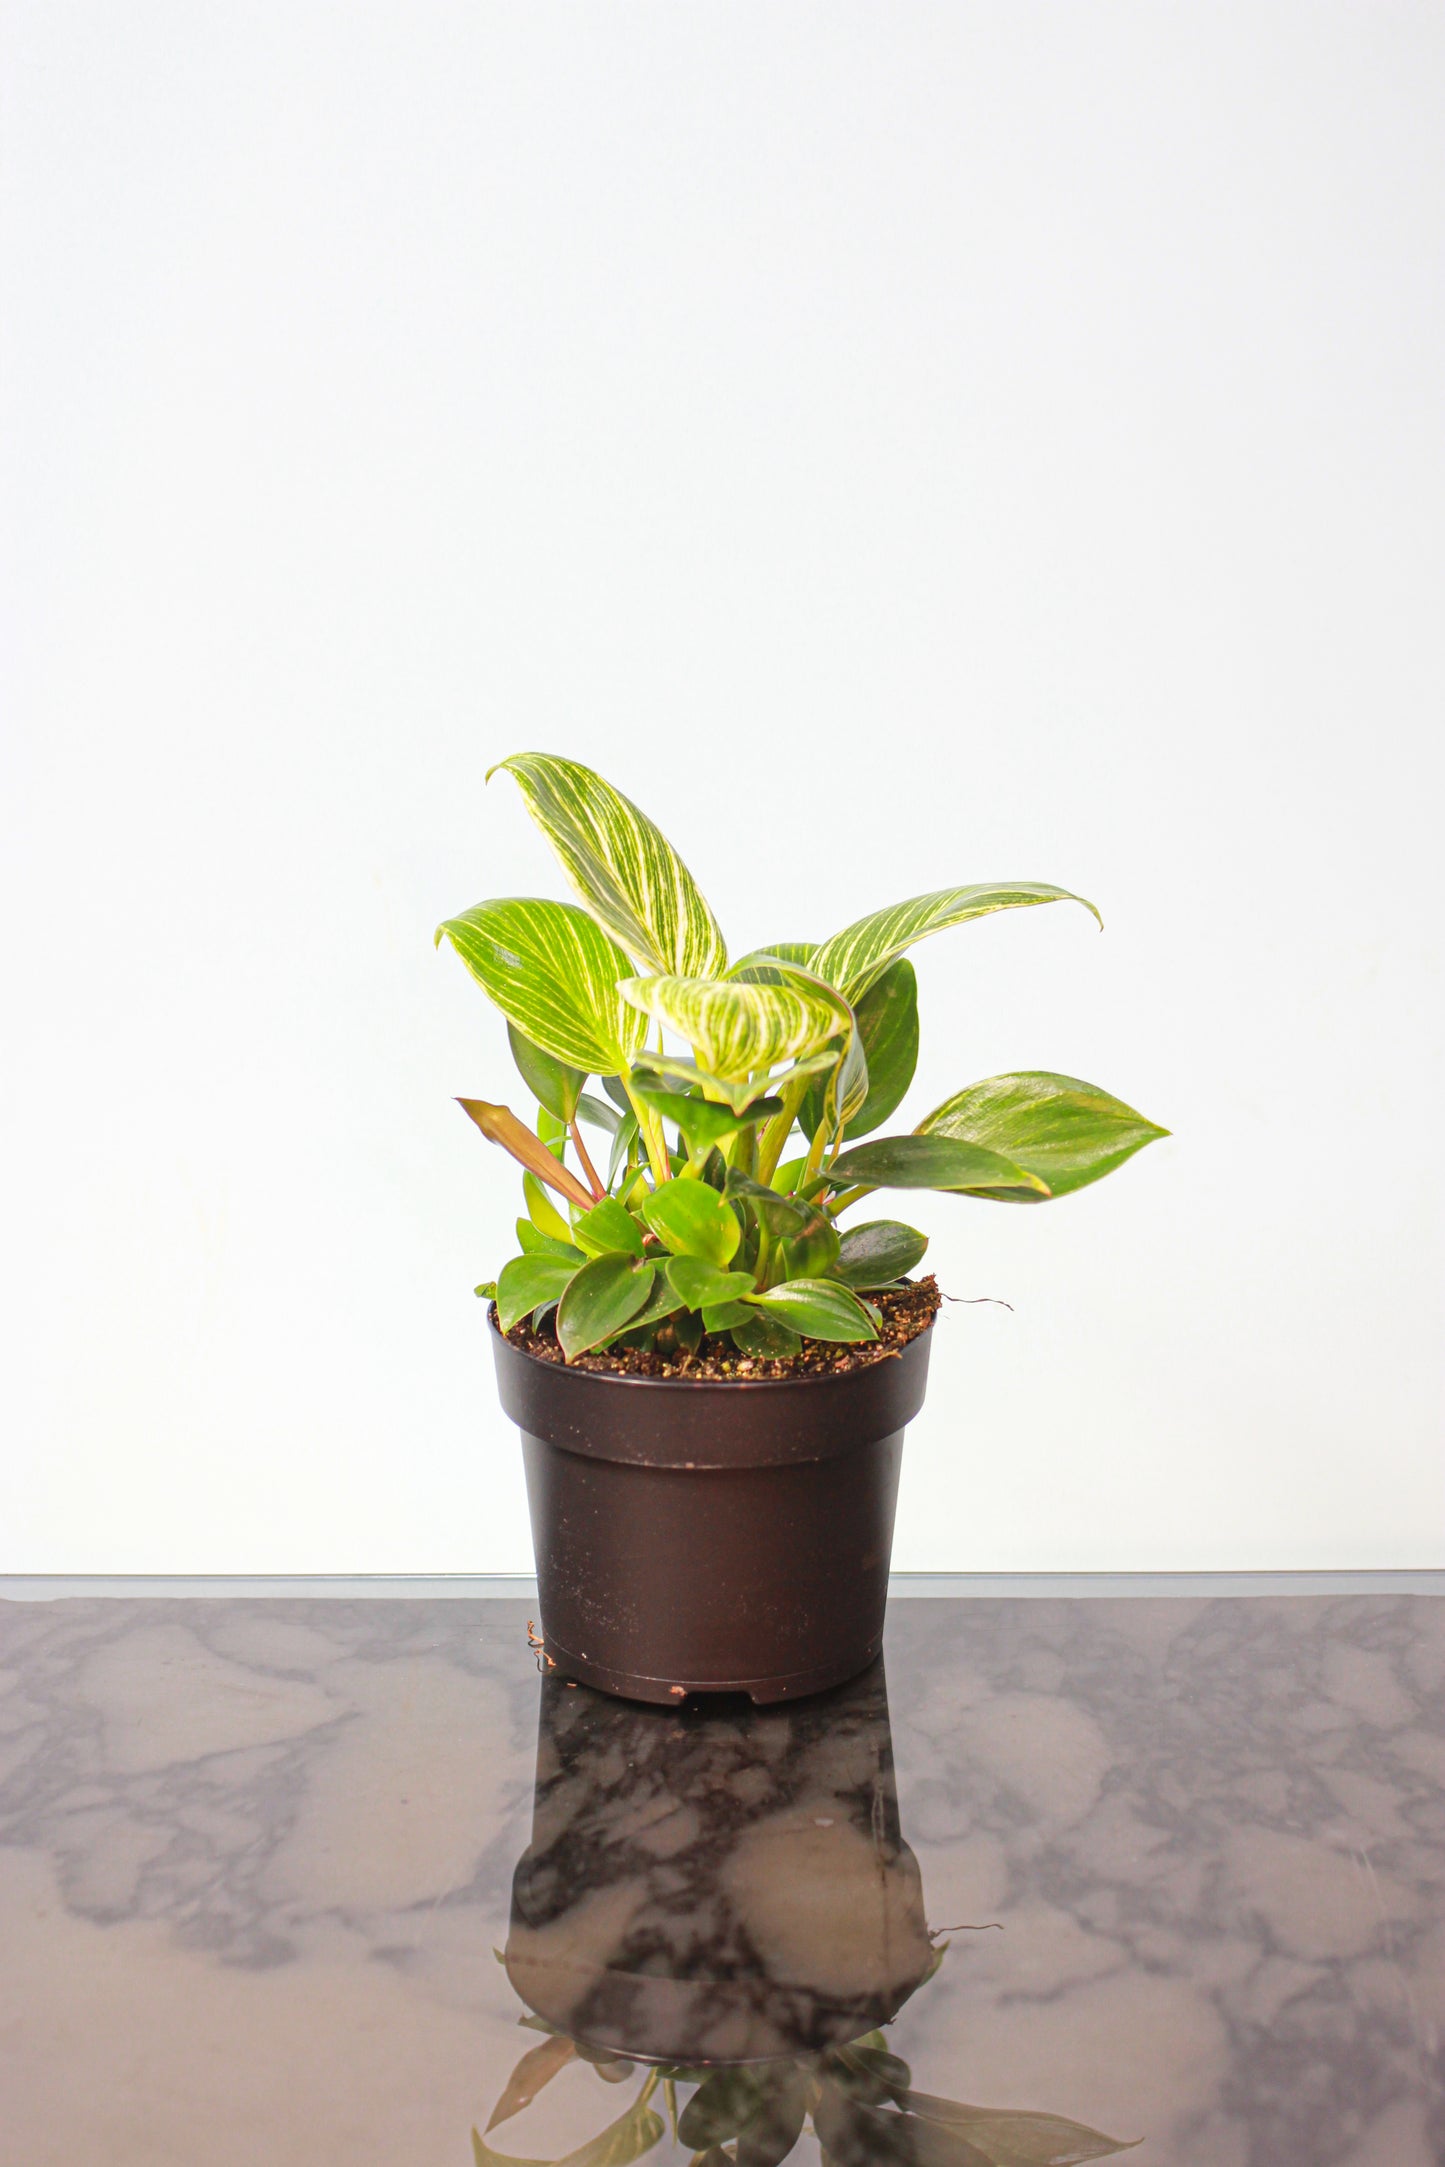 Birkin Philo (Philodendron) in a 5 inch pot. Indoor plant for sale by Promise Supply for delivery and pickup in Toronto